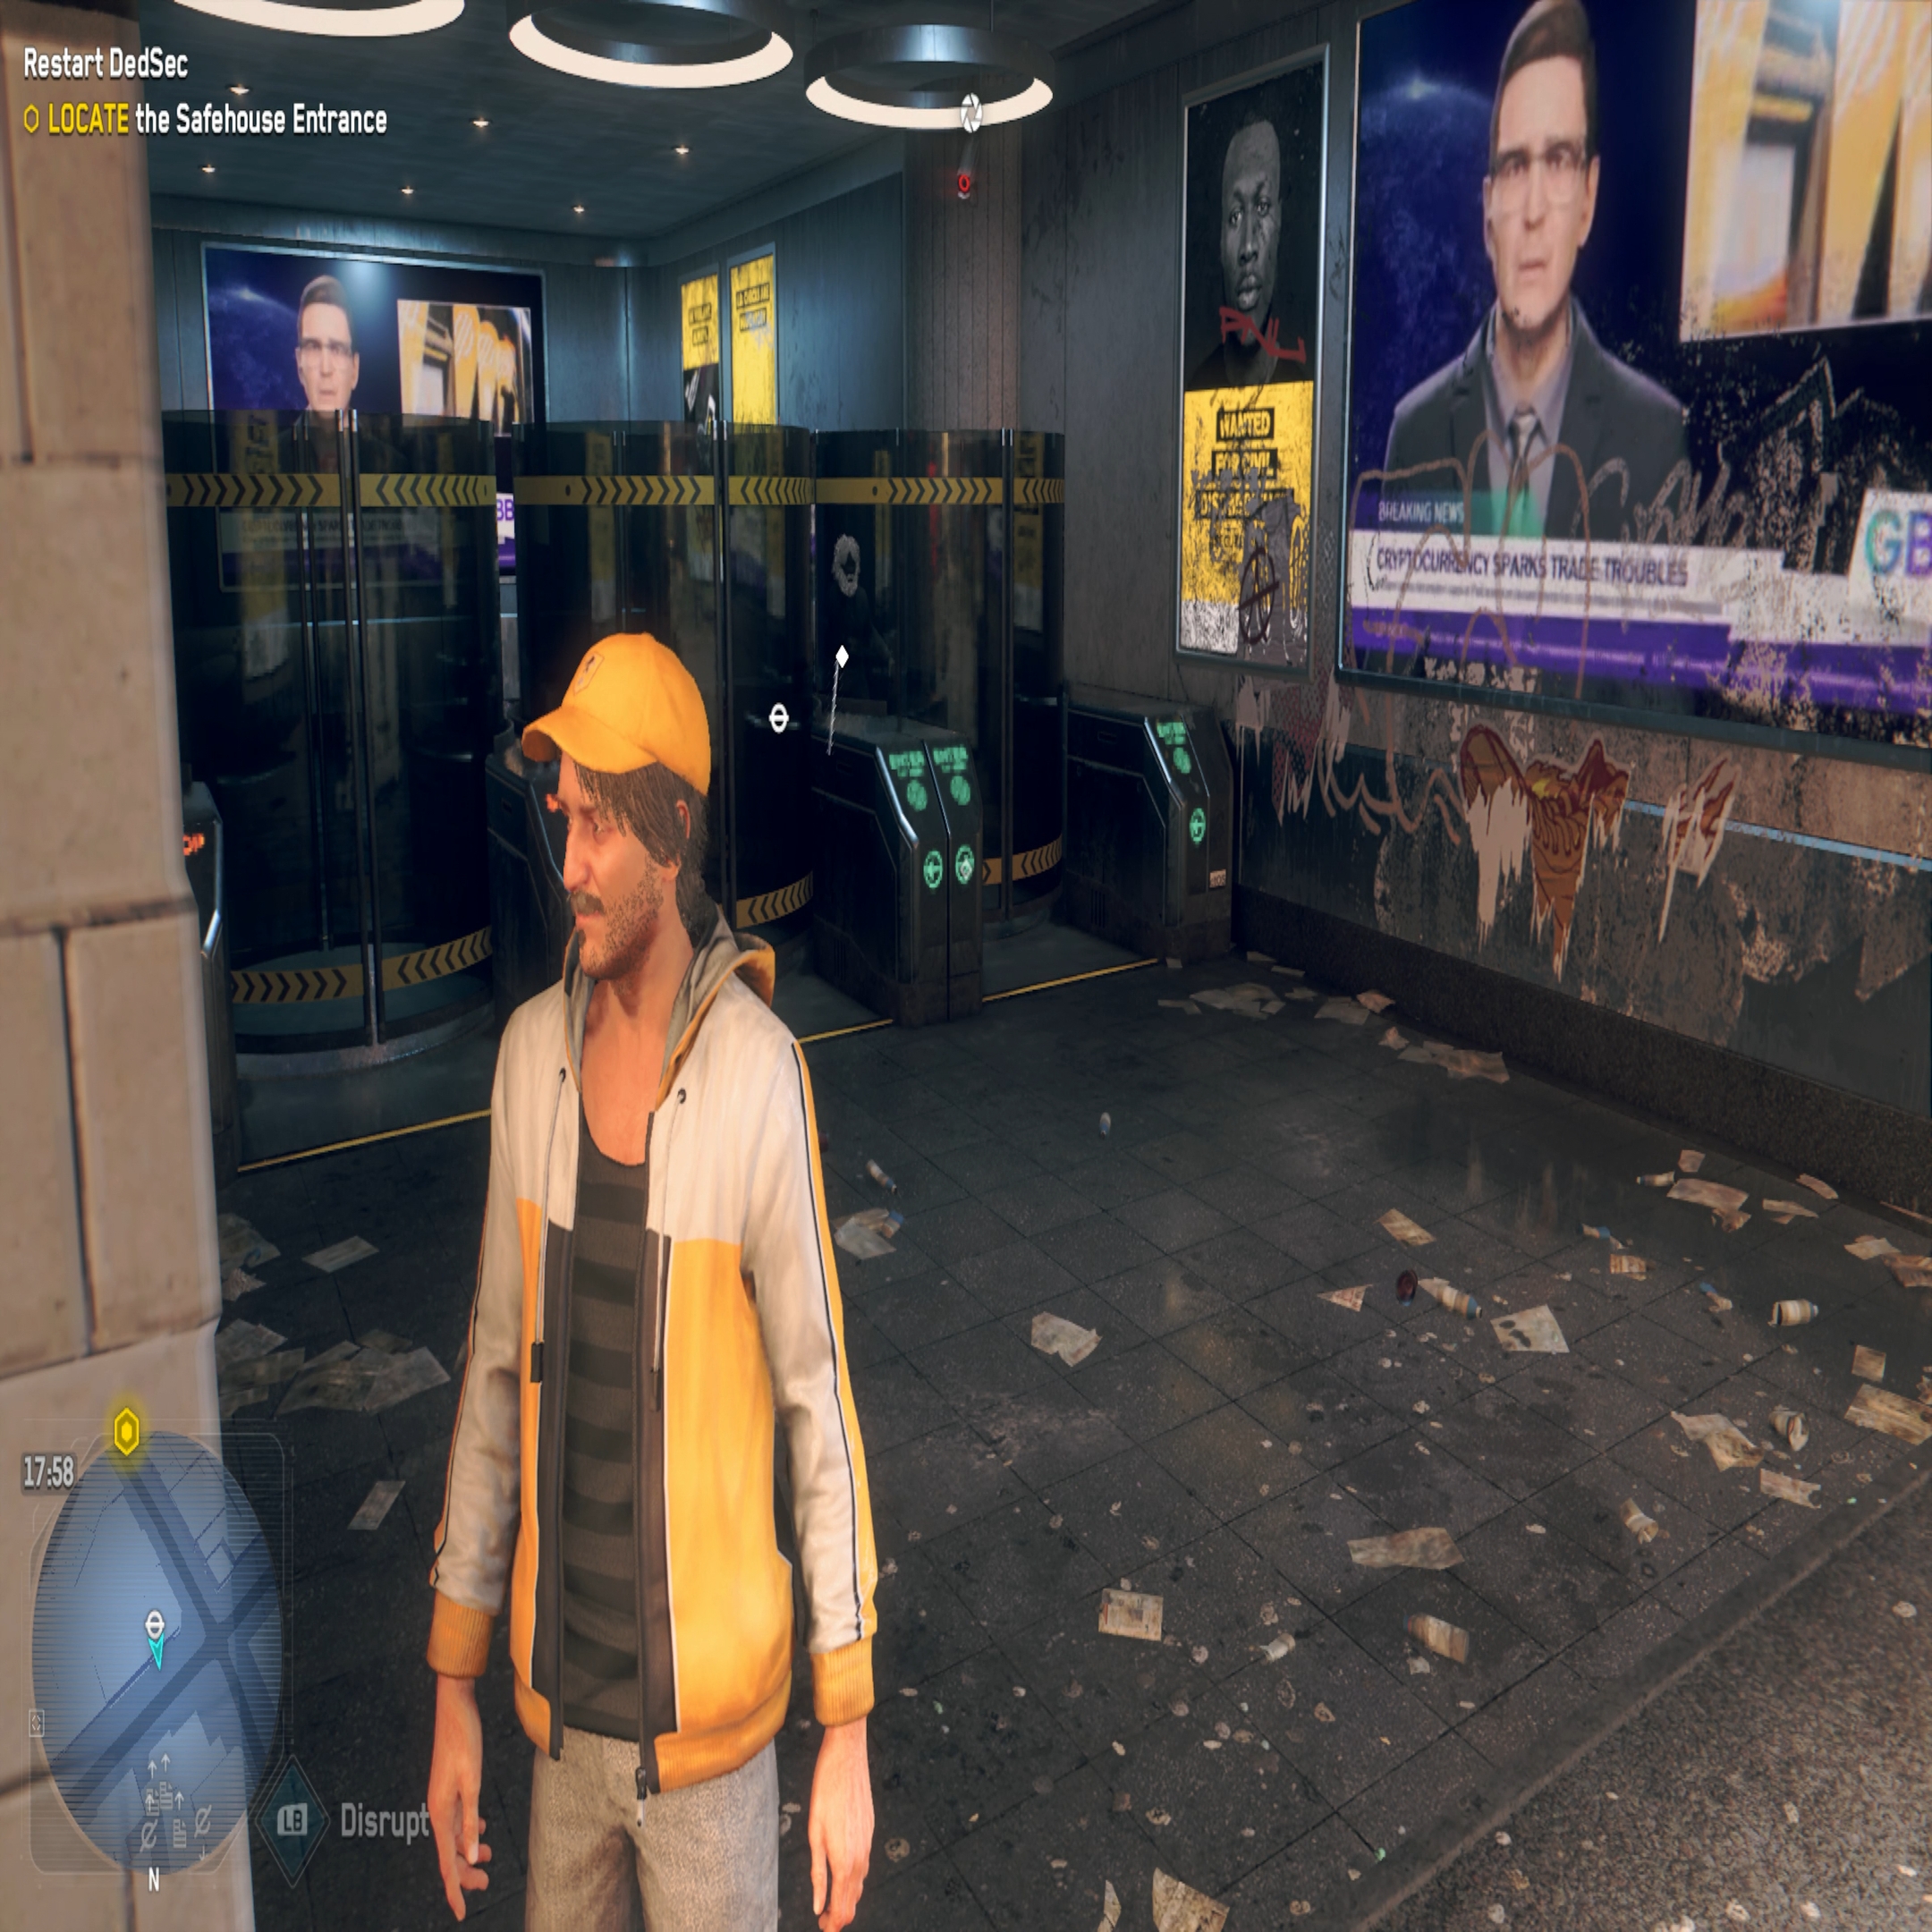 Watch Dogs: Legion Xbox Series S Ray Tracing is Rather Impressive